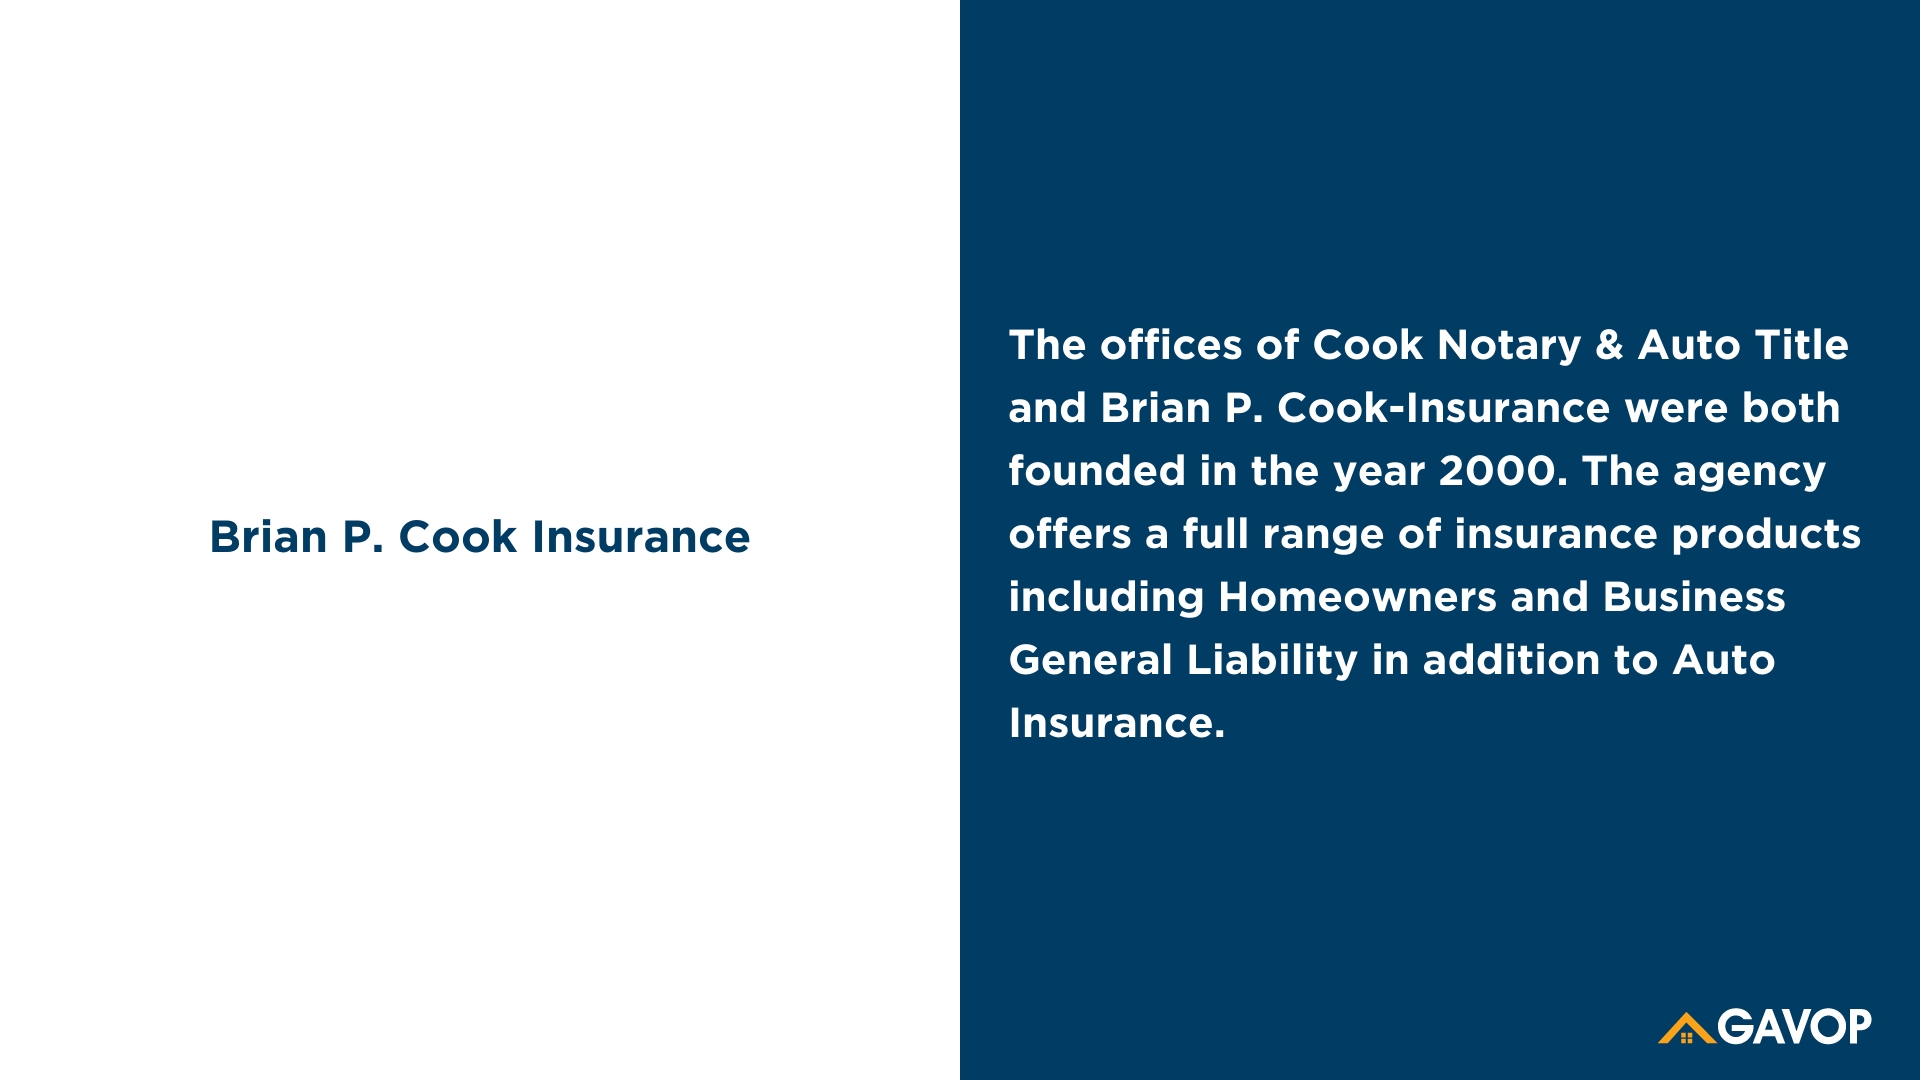 Brian Cook Insurance